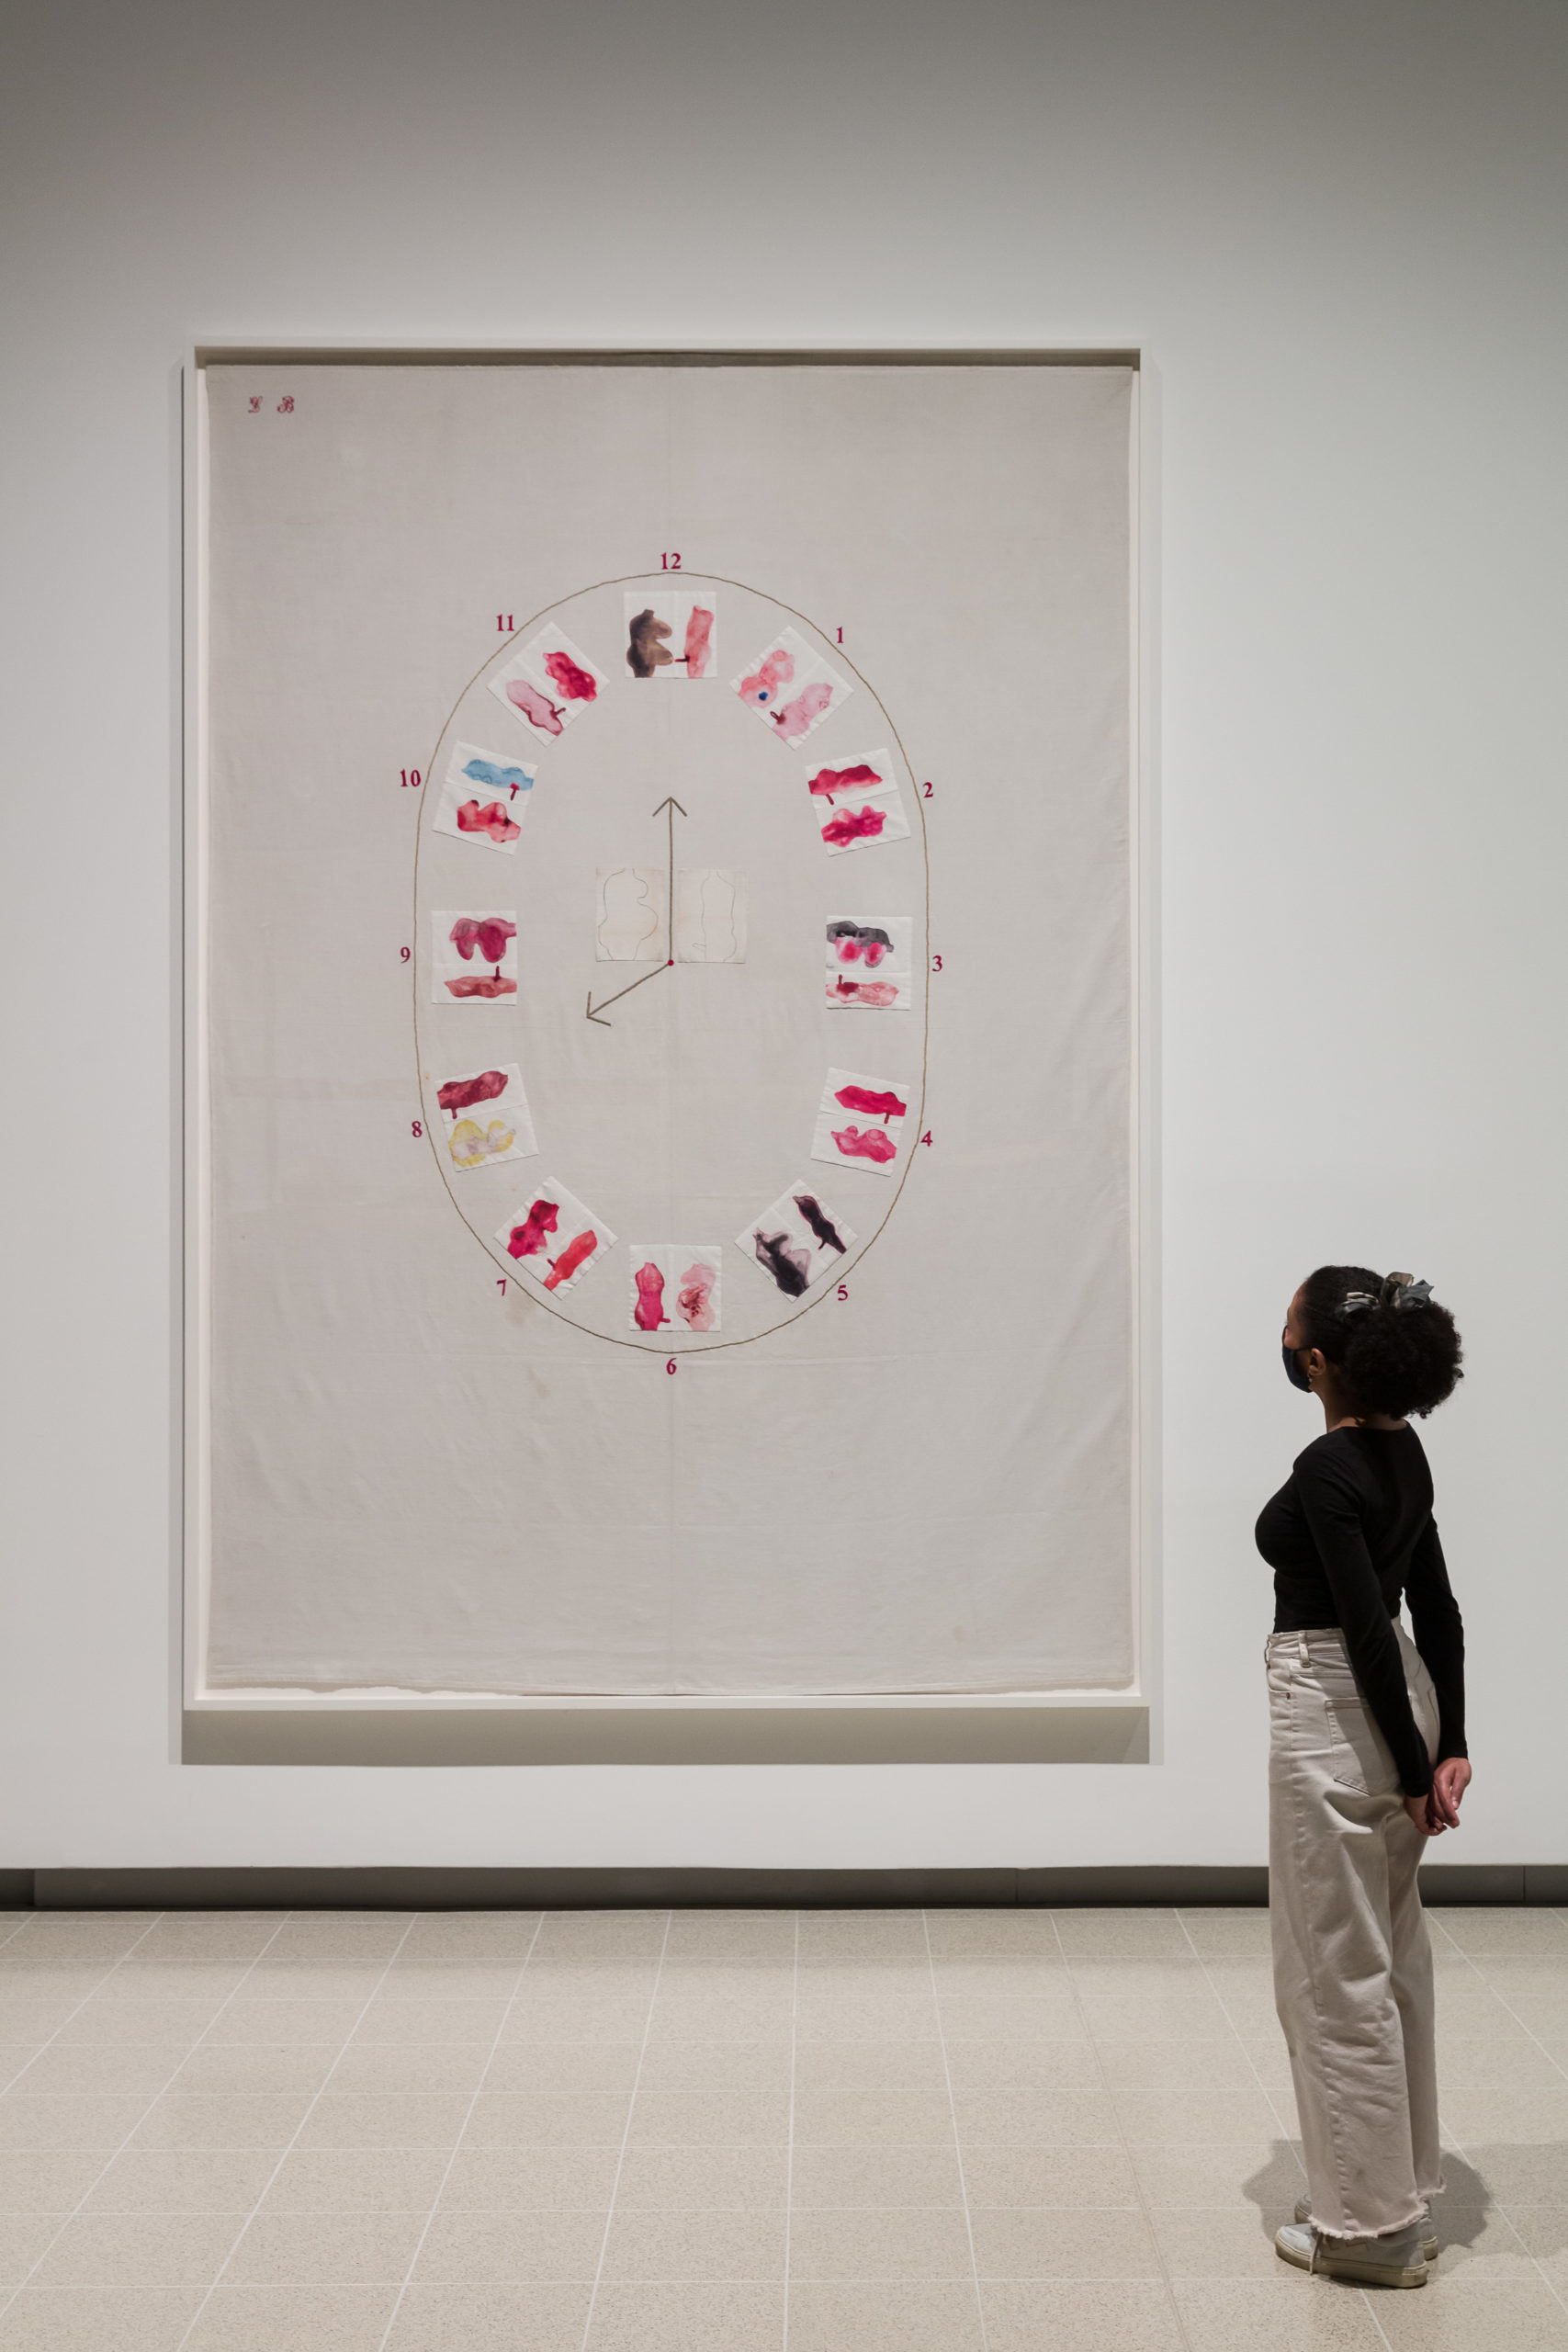 Louise Bourgeois: The Woven Child” at the